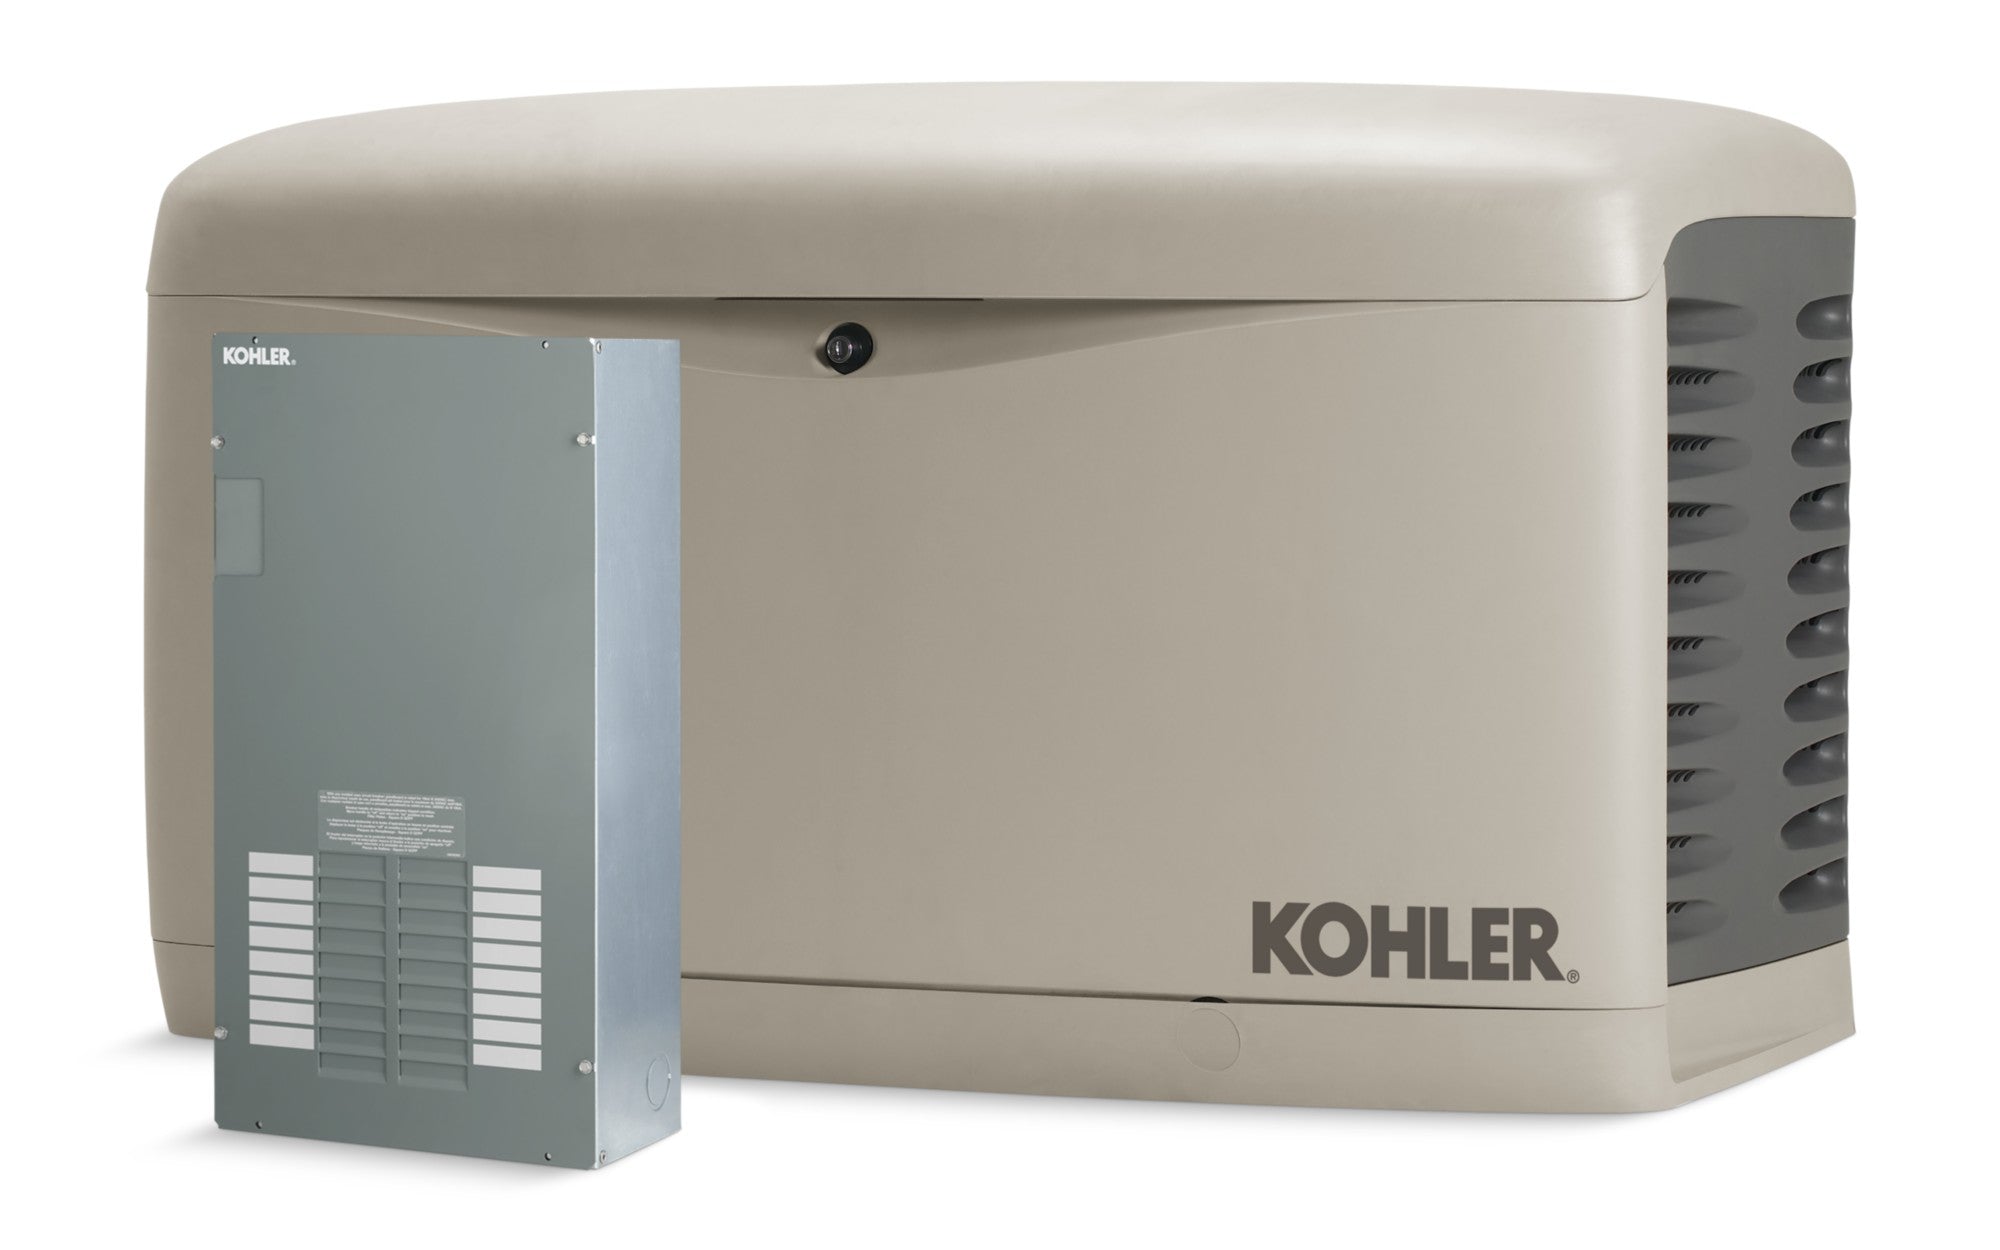 Kohler 20RESCL-200SELS Air-Cooled Standby Generator with 200 Amp Transfer Switch Single Phase, 20,000-Watt